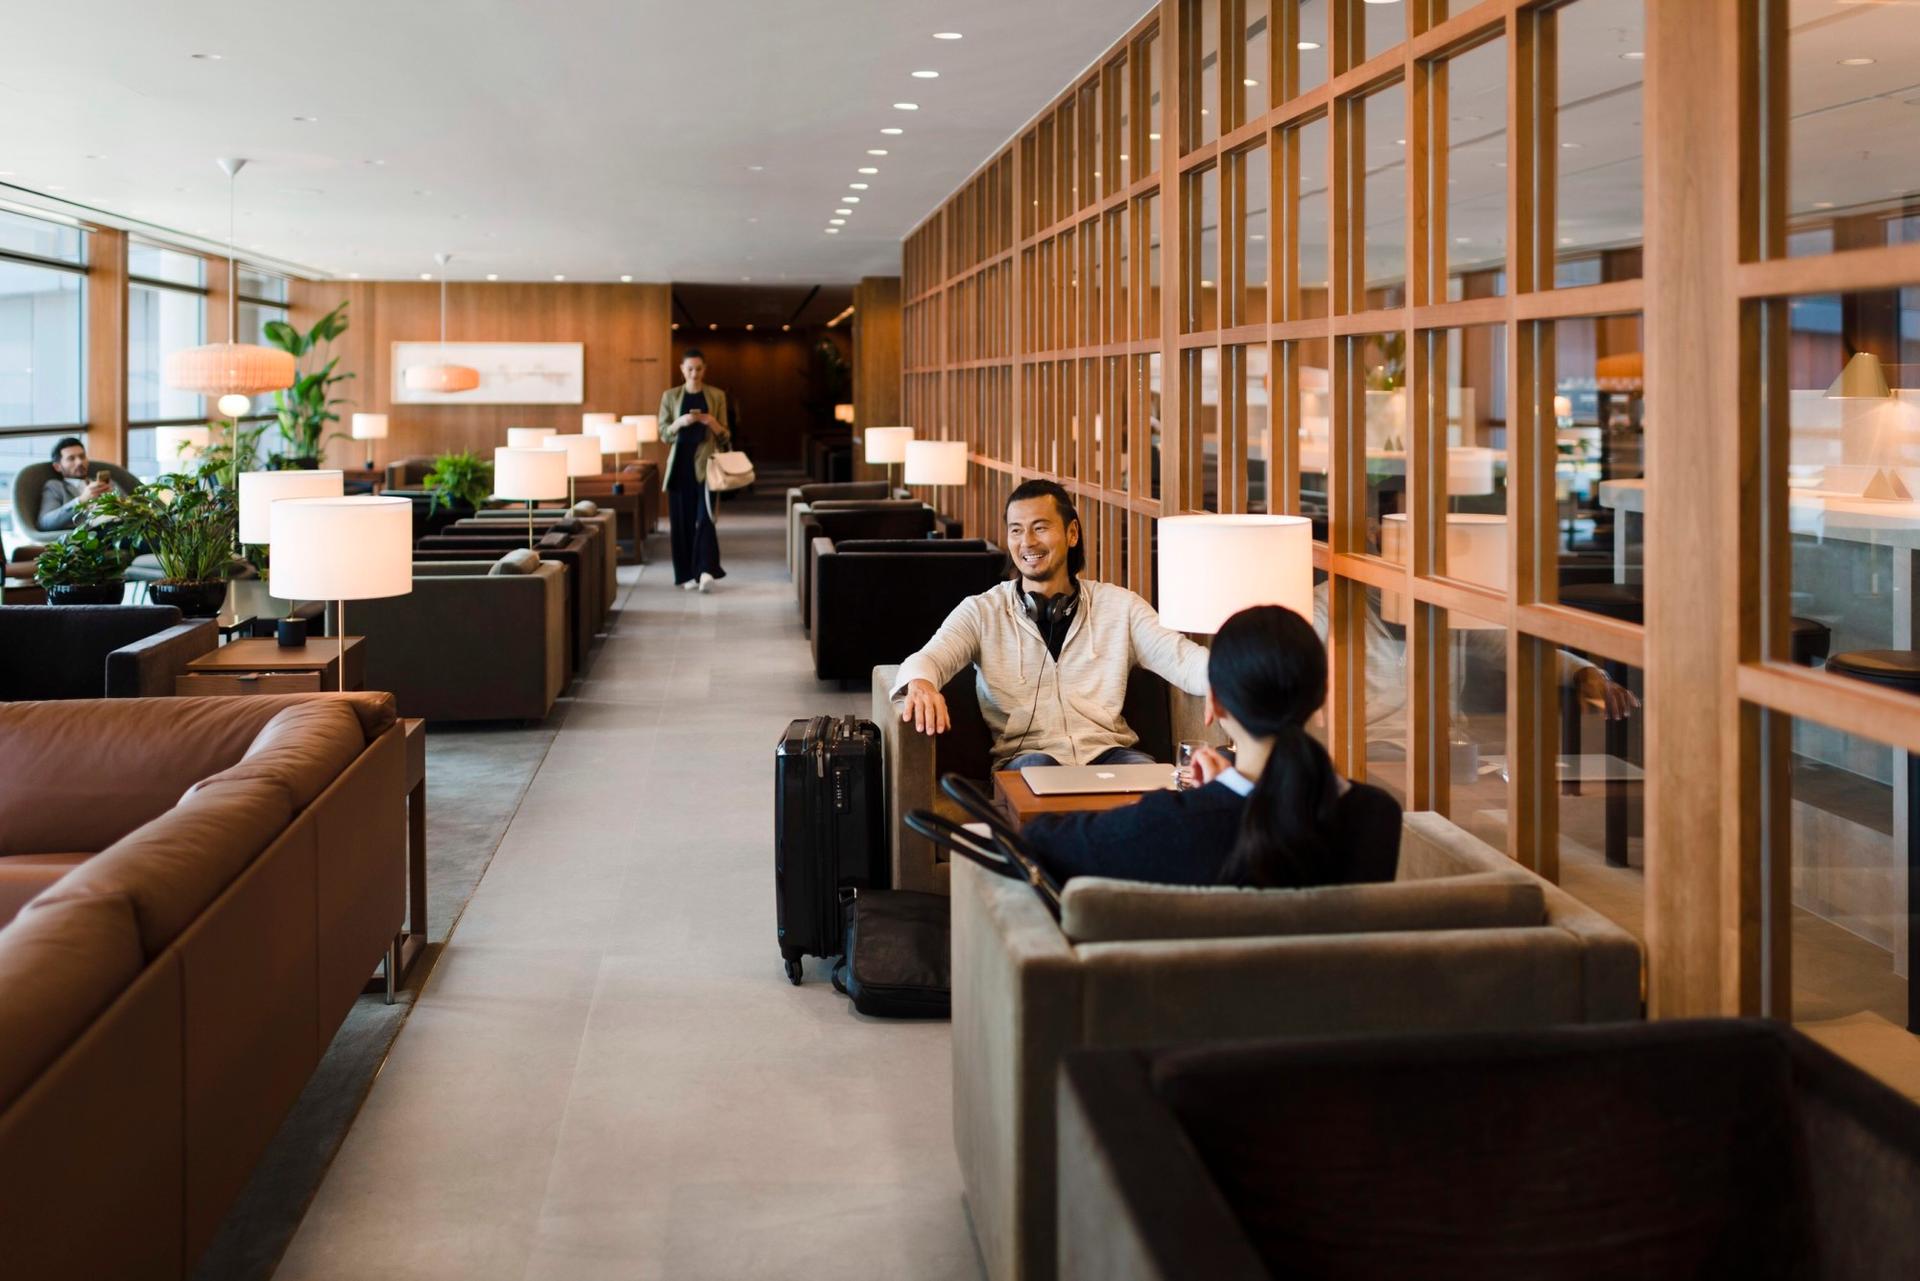 Cathay Pacific The Pier Business Class Lounge image 50 of 61